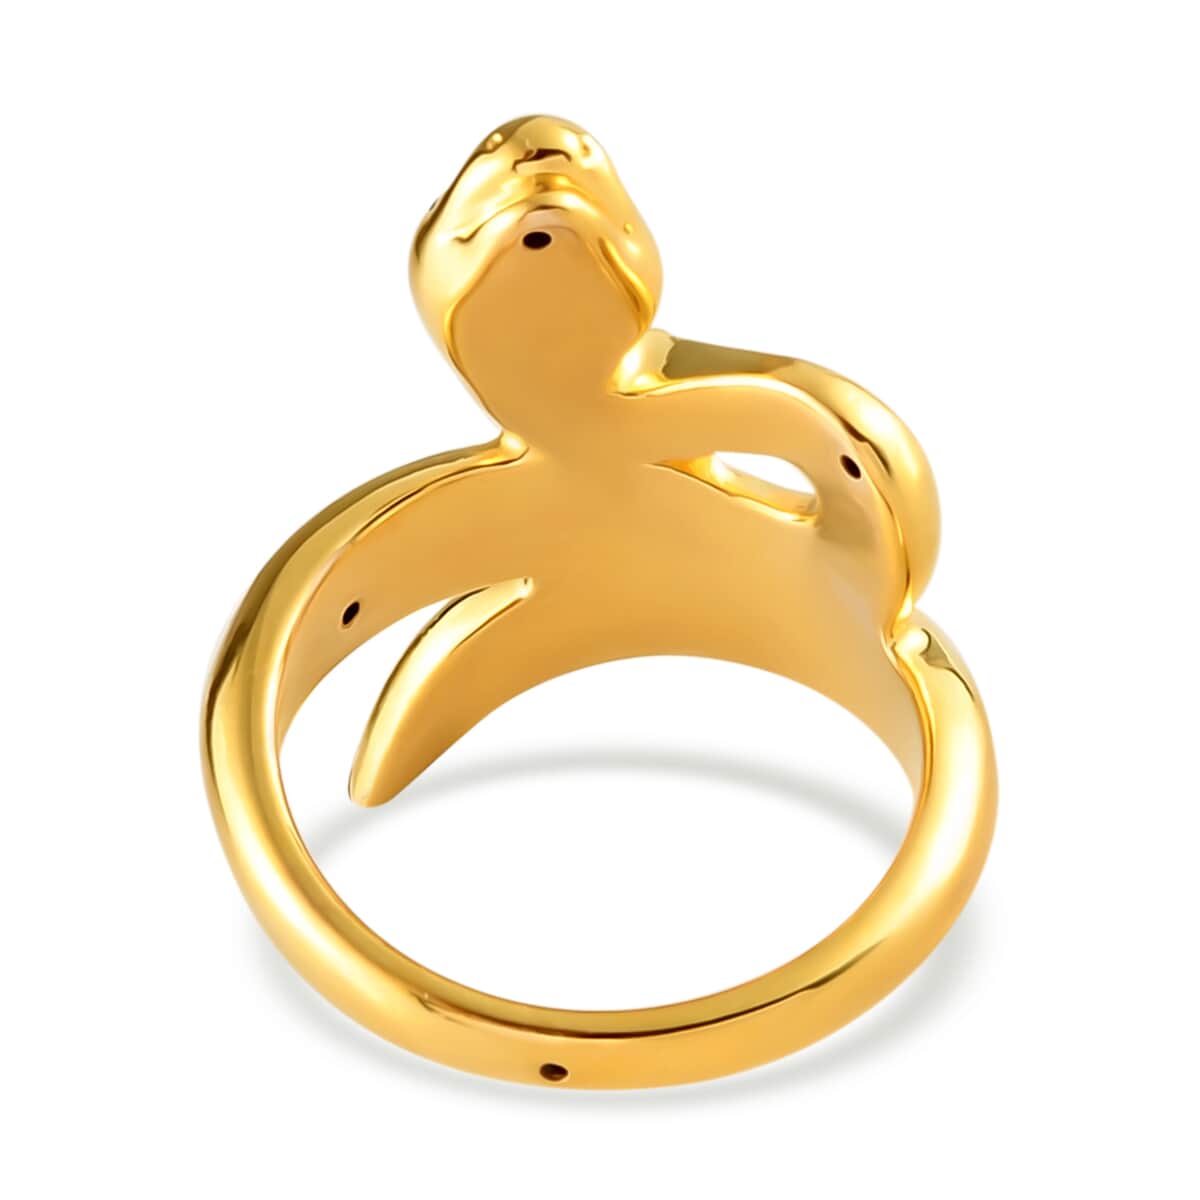 Super Find Electroforming Gold Collection 18K Yellow Gold Snake Ring (Size 9.0) 2.25 Grams image number 4